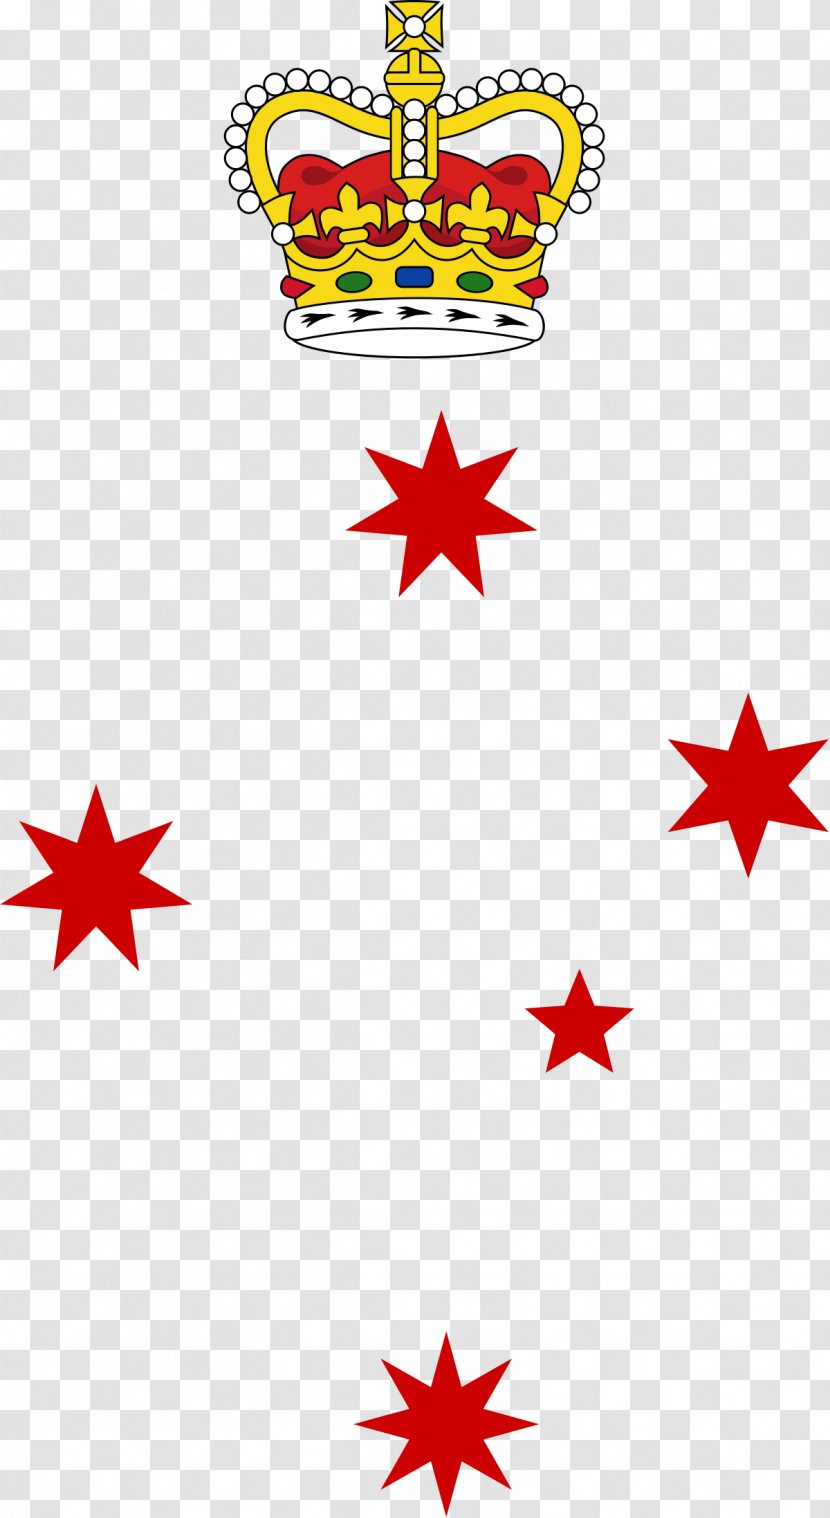 Flags Depicting The Southern Cross Crux Flag Of Australia Eureka Rebellion Transparent PNG